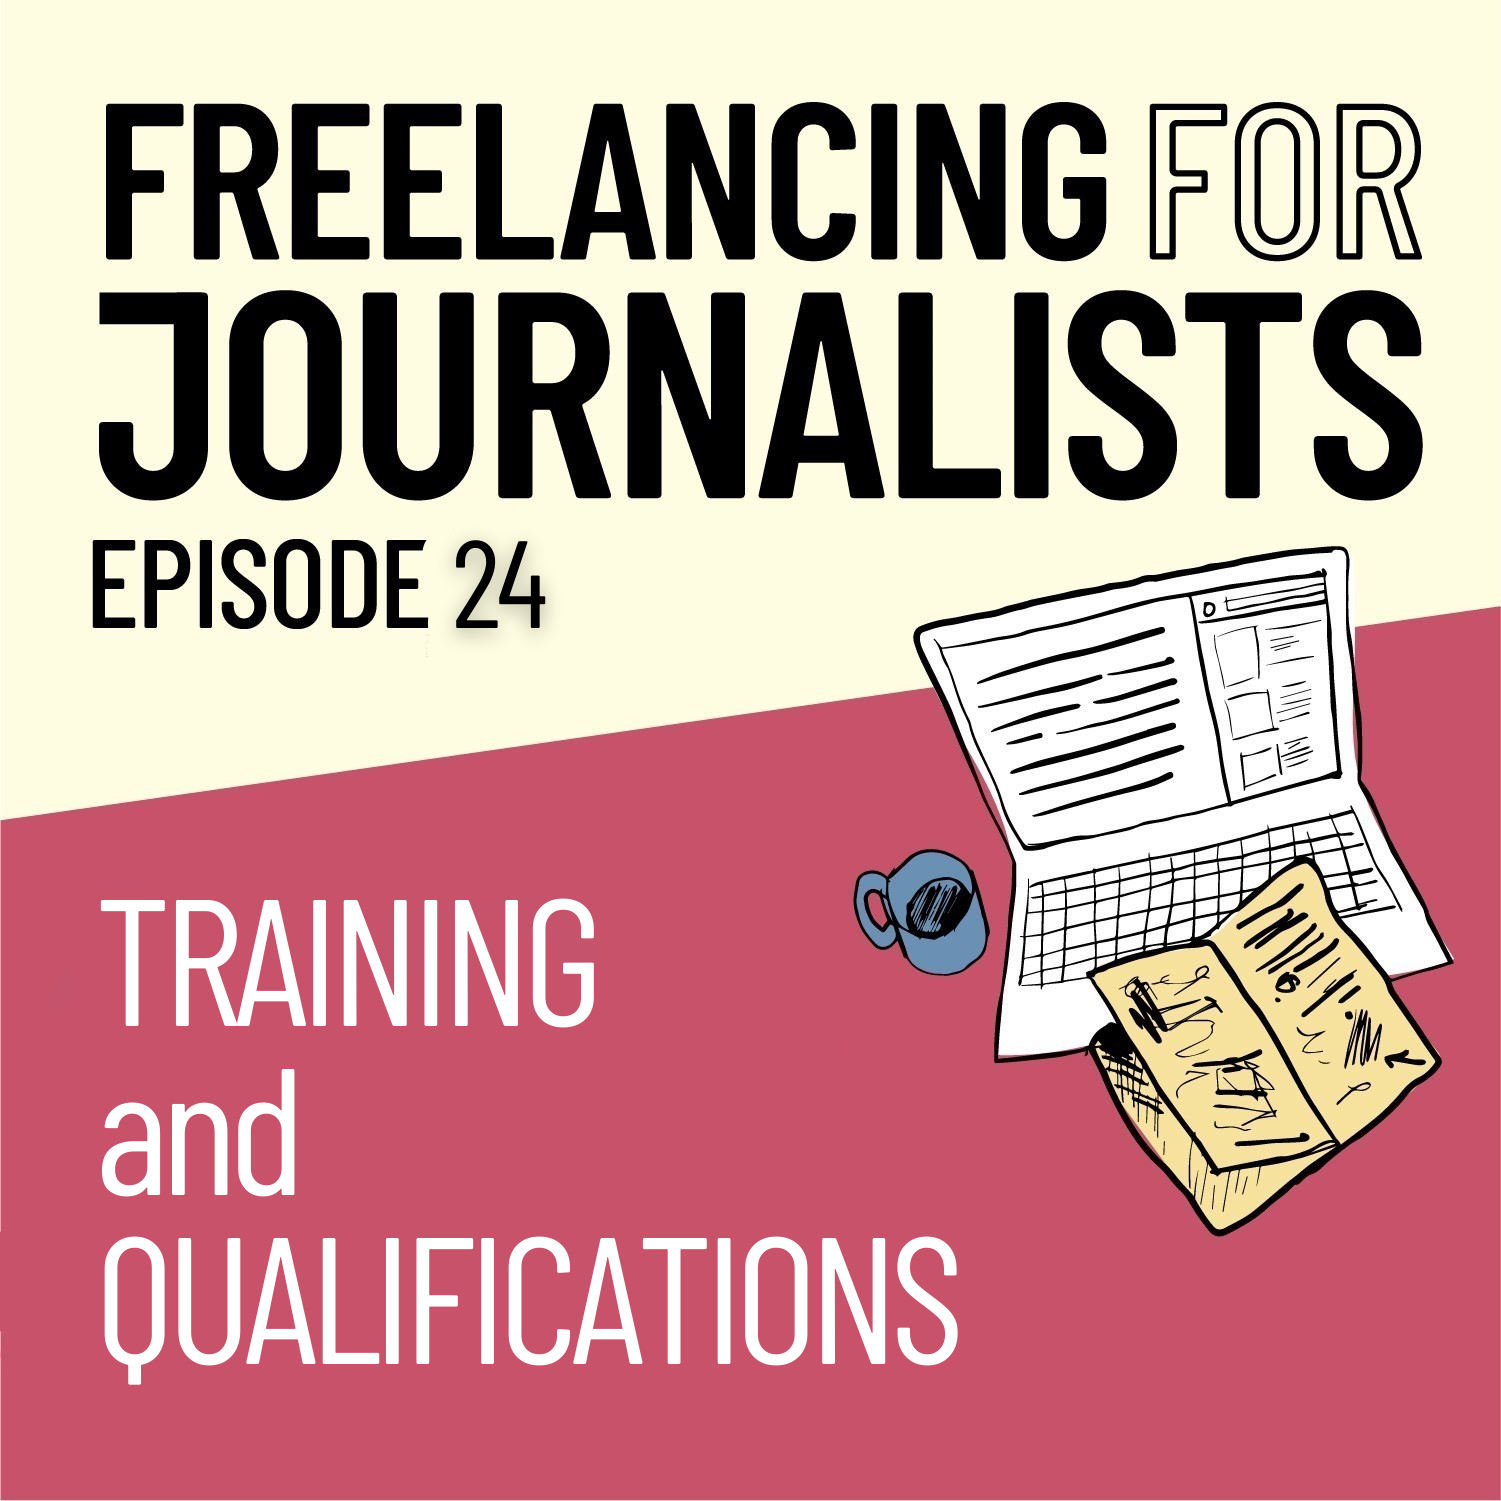 Artwork for podcast Freelancing for Journalists